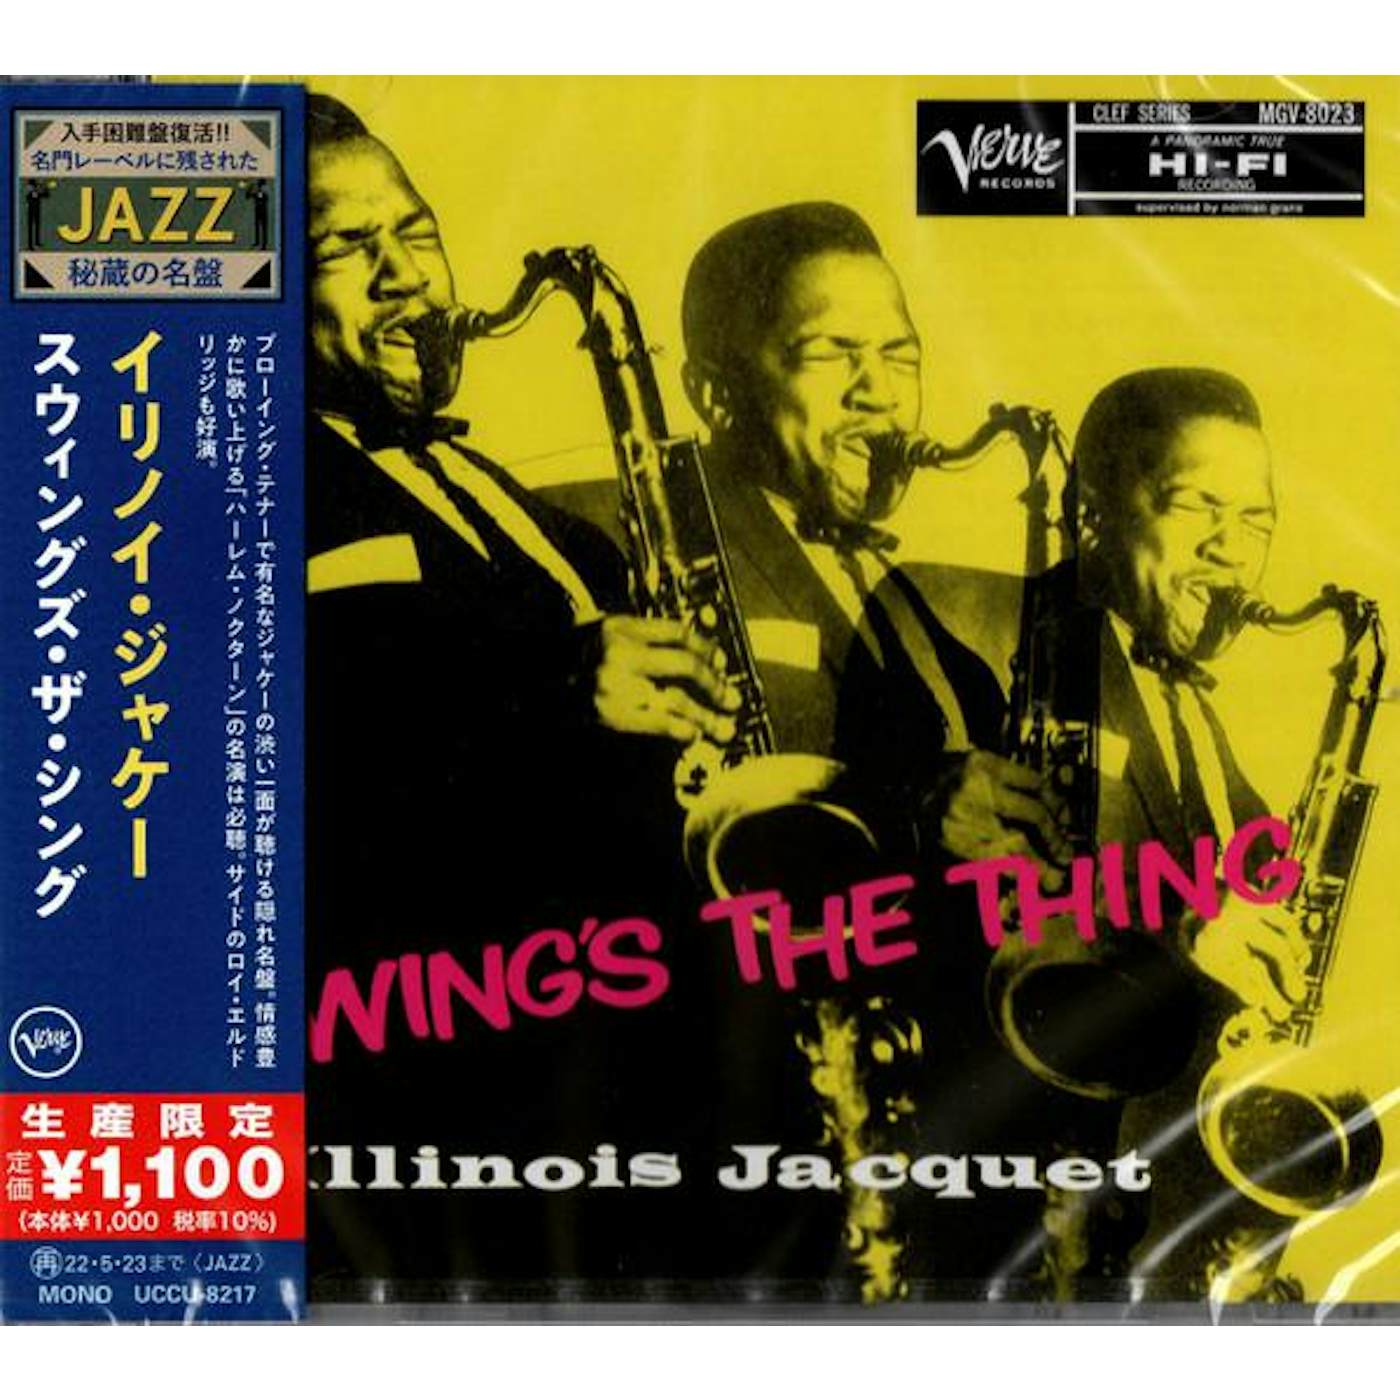 Illinois Jacquet SWING'S THE THING CD